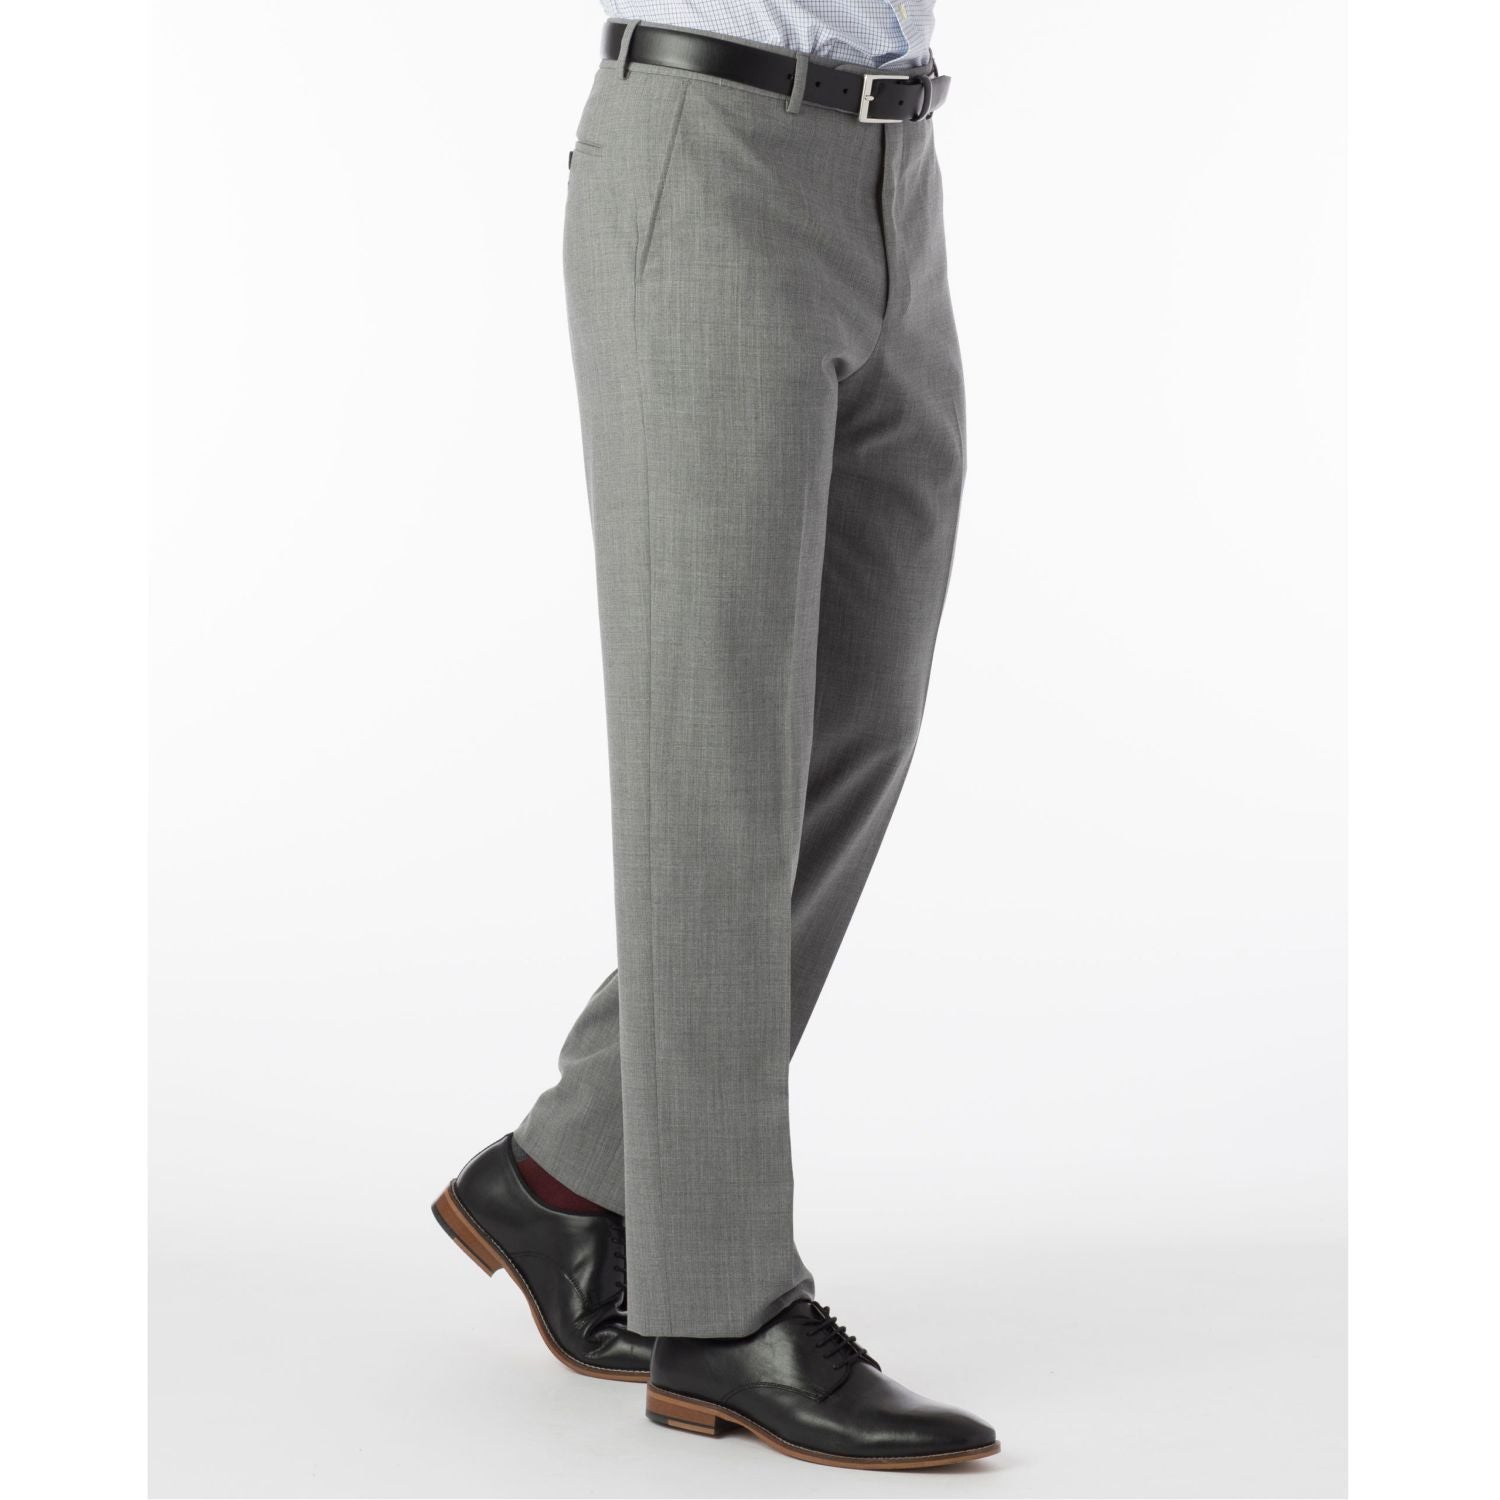 Super 120s Wool Travel Twill Comfort-EZE Trouser in Pearl Grey (Flat Front Models) by Ballin